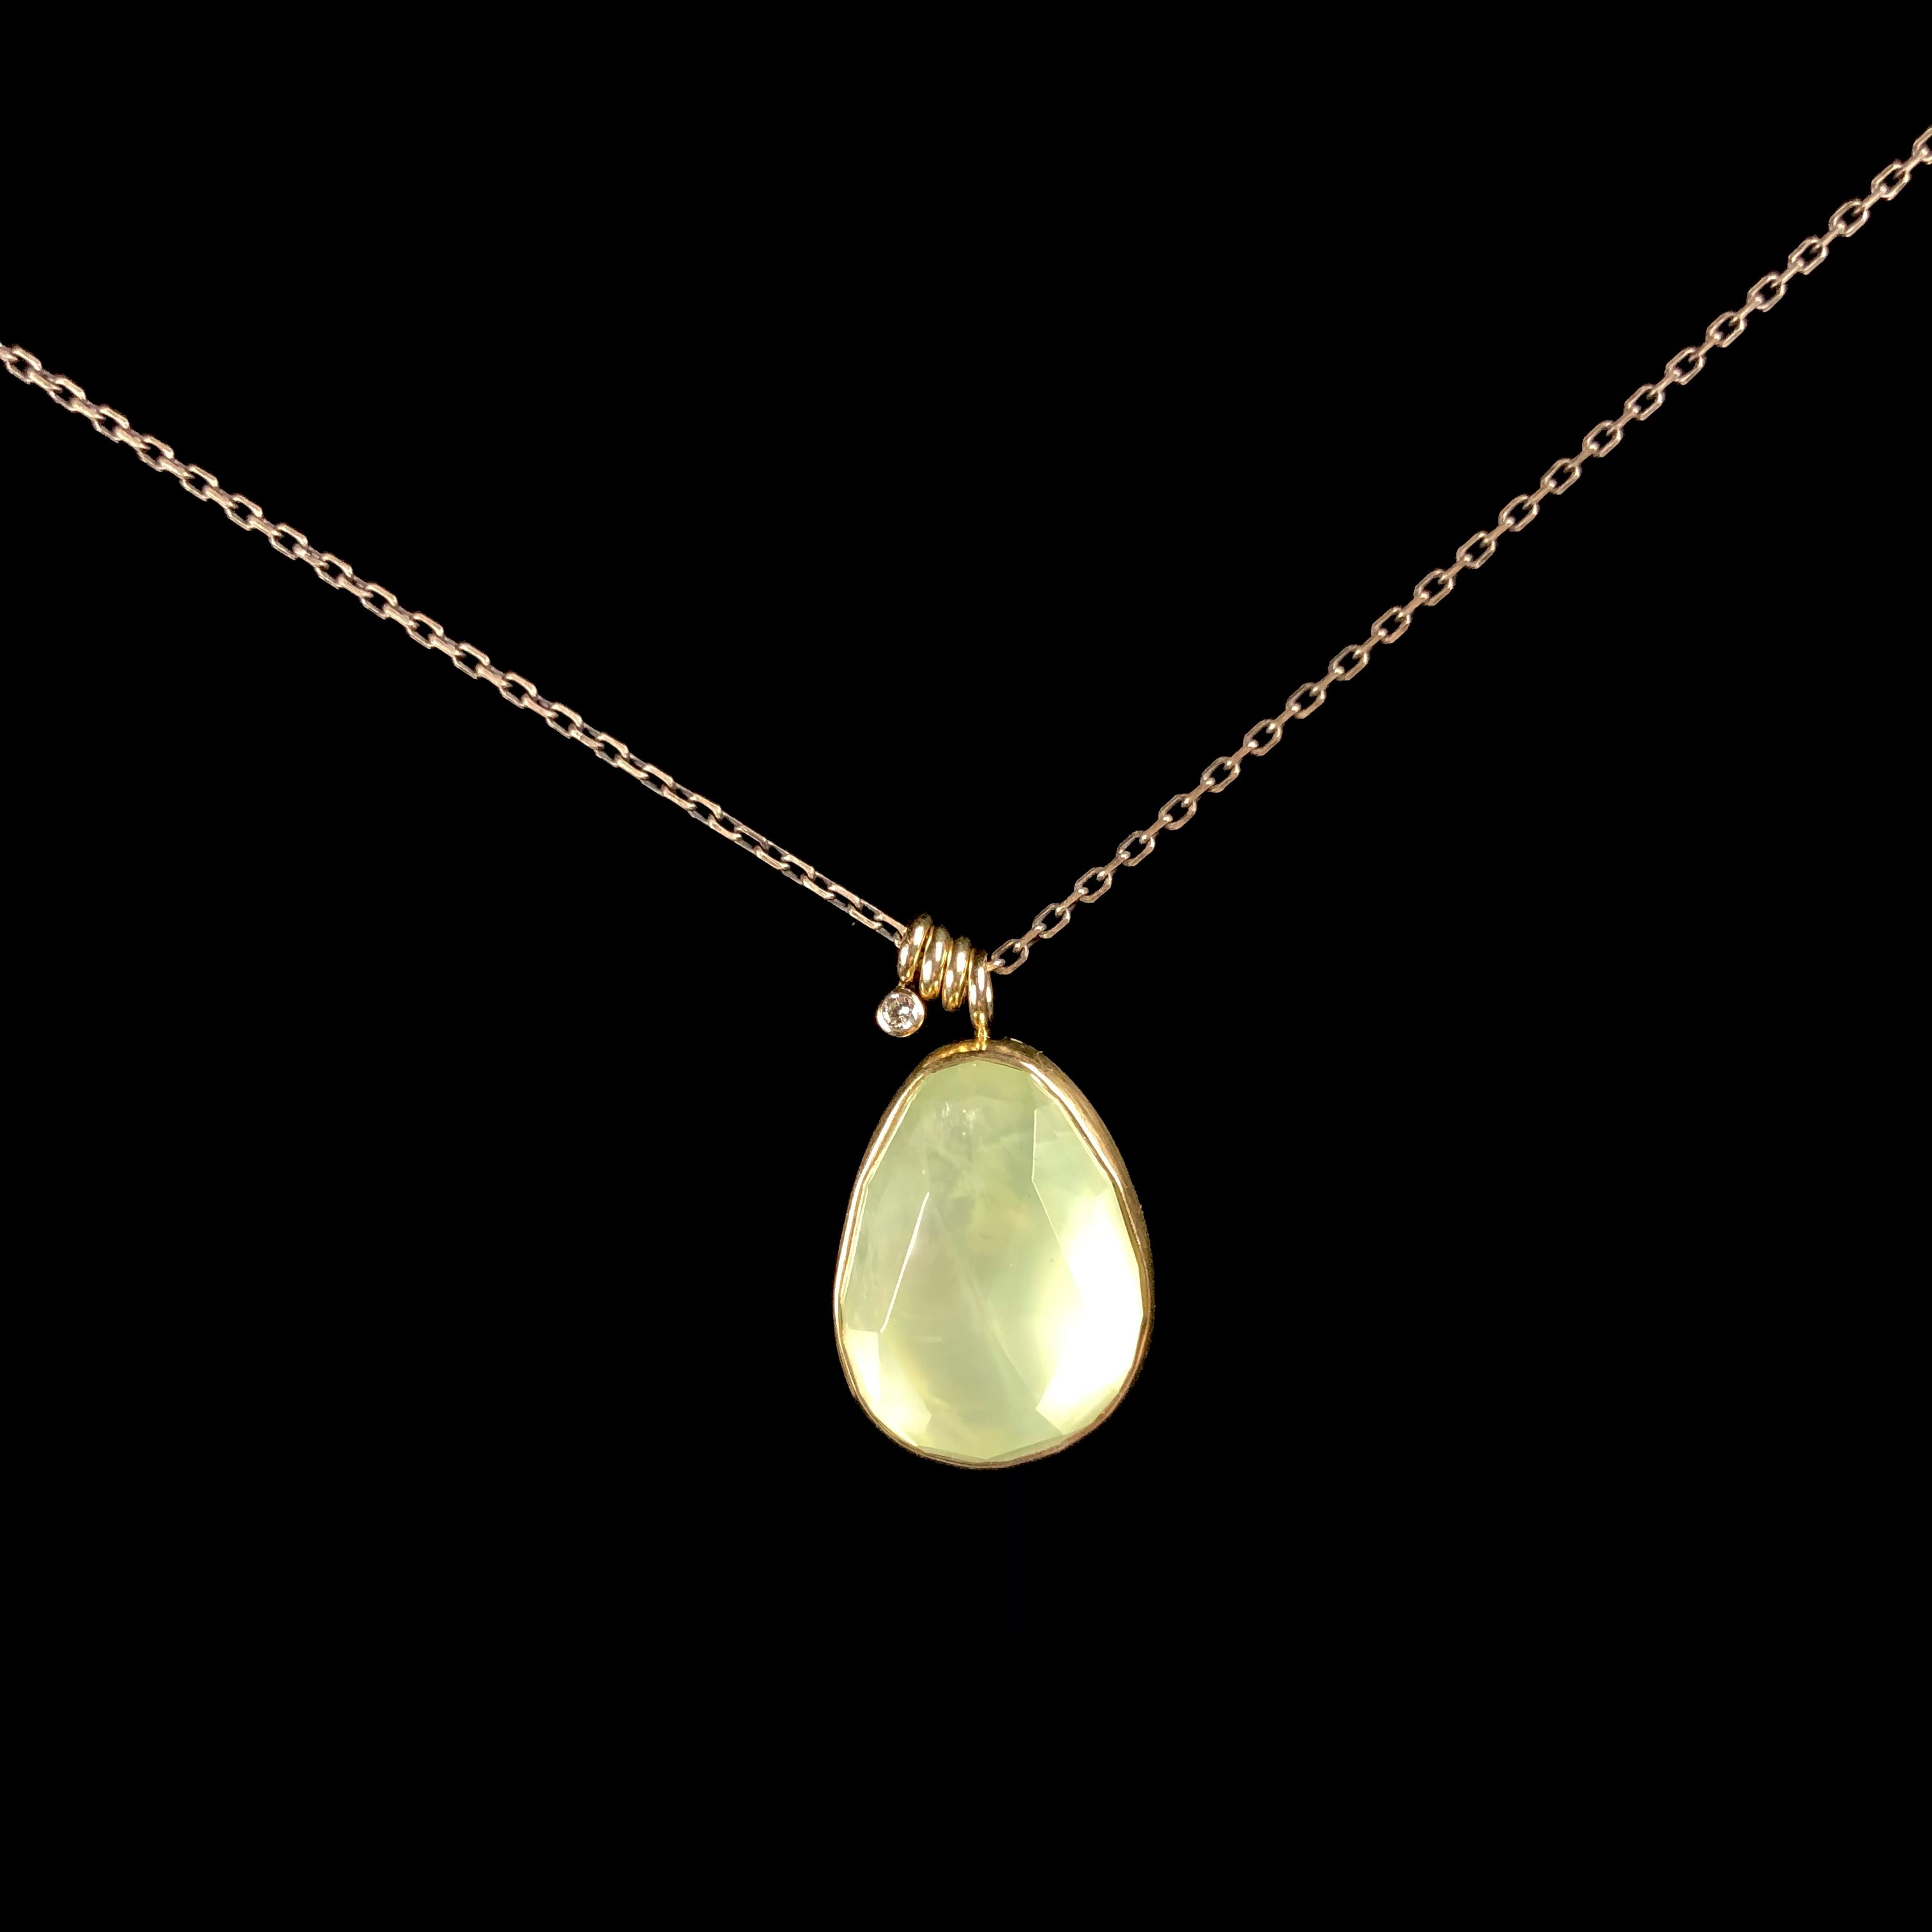 Light green teardrop shaped stone with gold setting on blackened silver chain